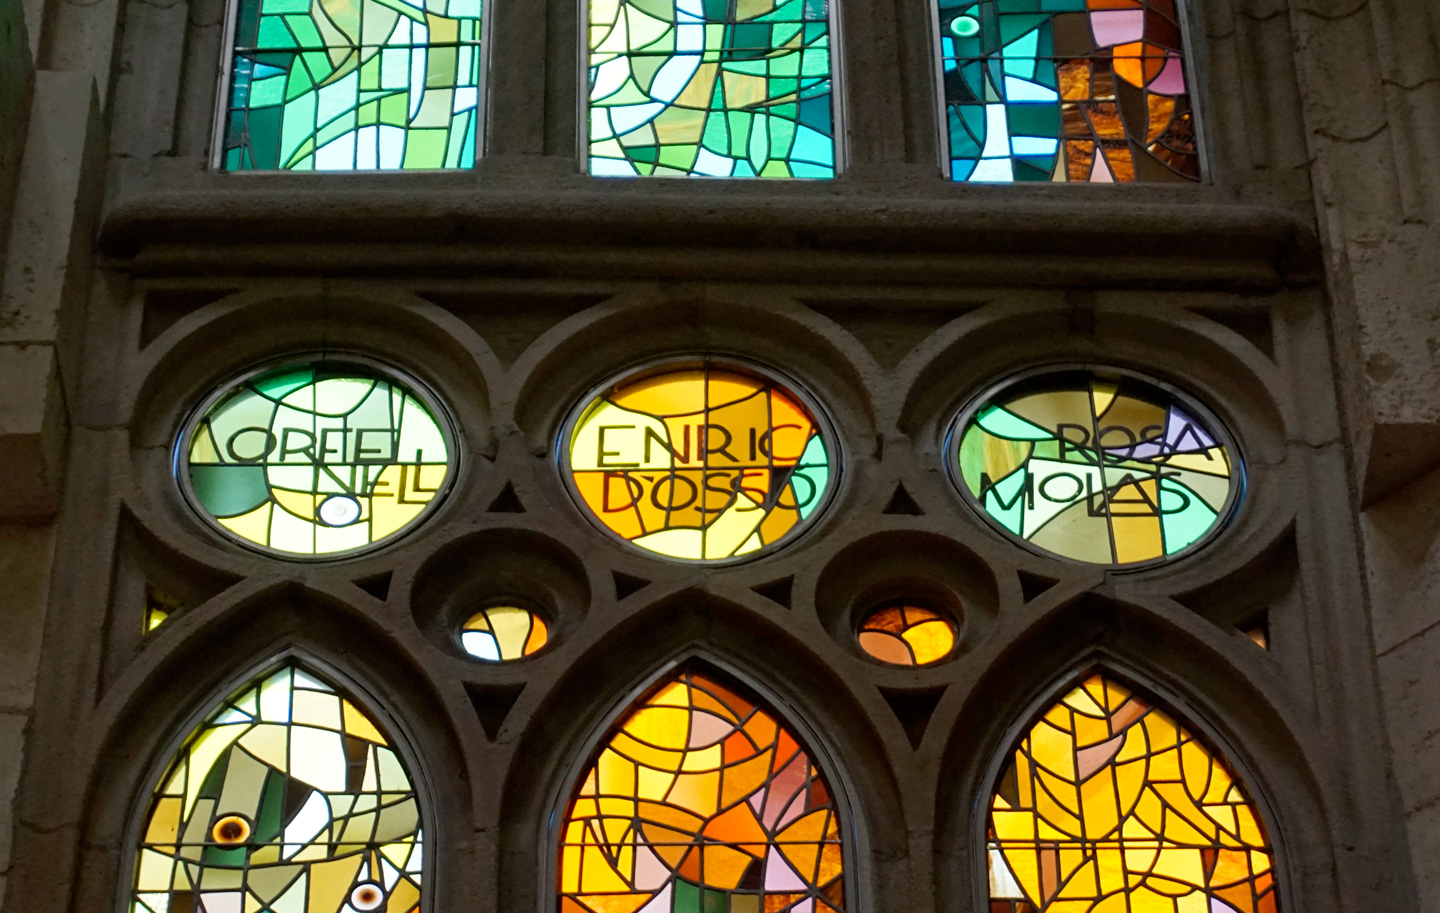 Art Deco style sans-serifs on the stained glass panels